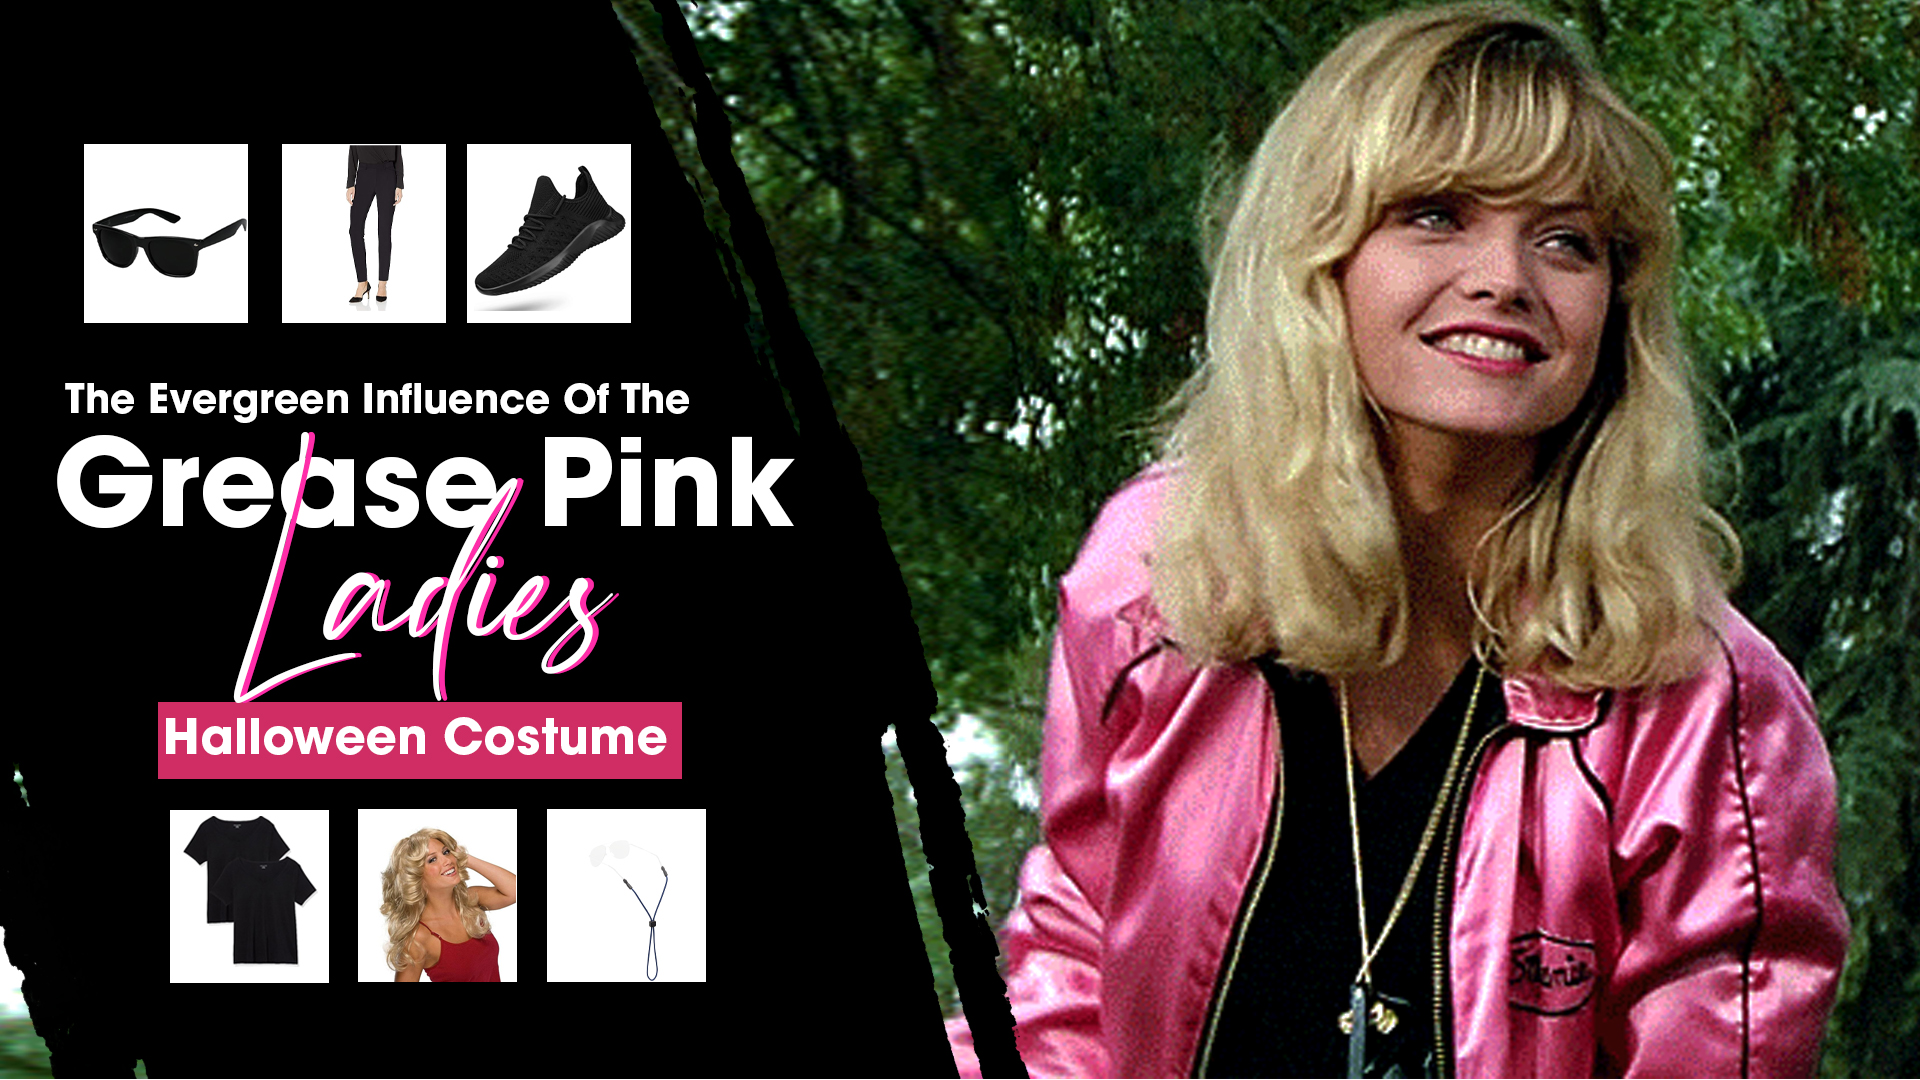 The Evergreen Influence Of The Grease Pink Ladies Halloween